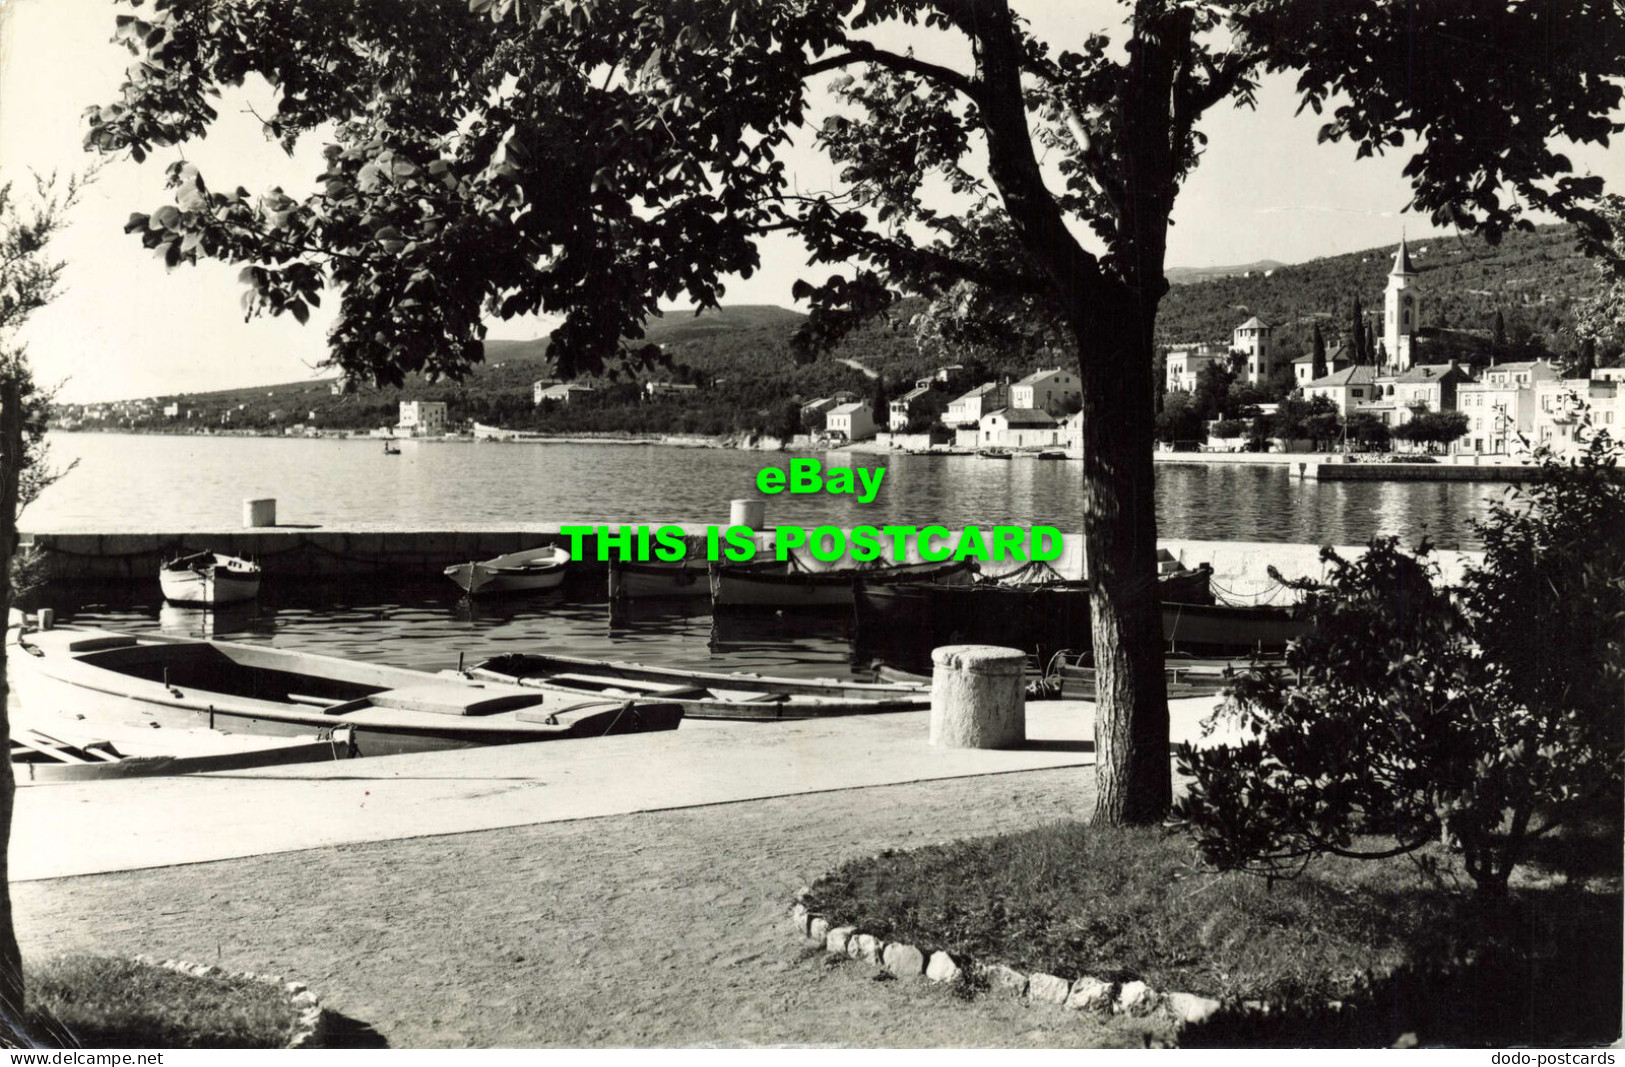 R568902 Unknown Place. River. Boats. Trees - Welt